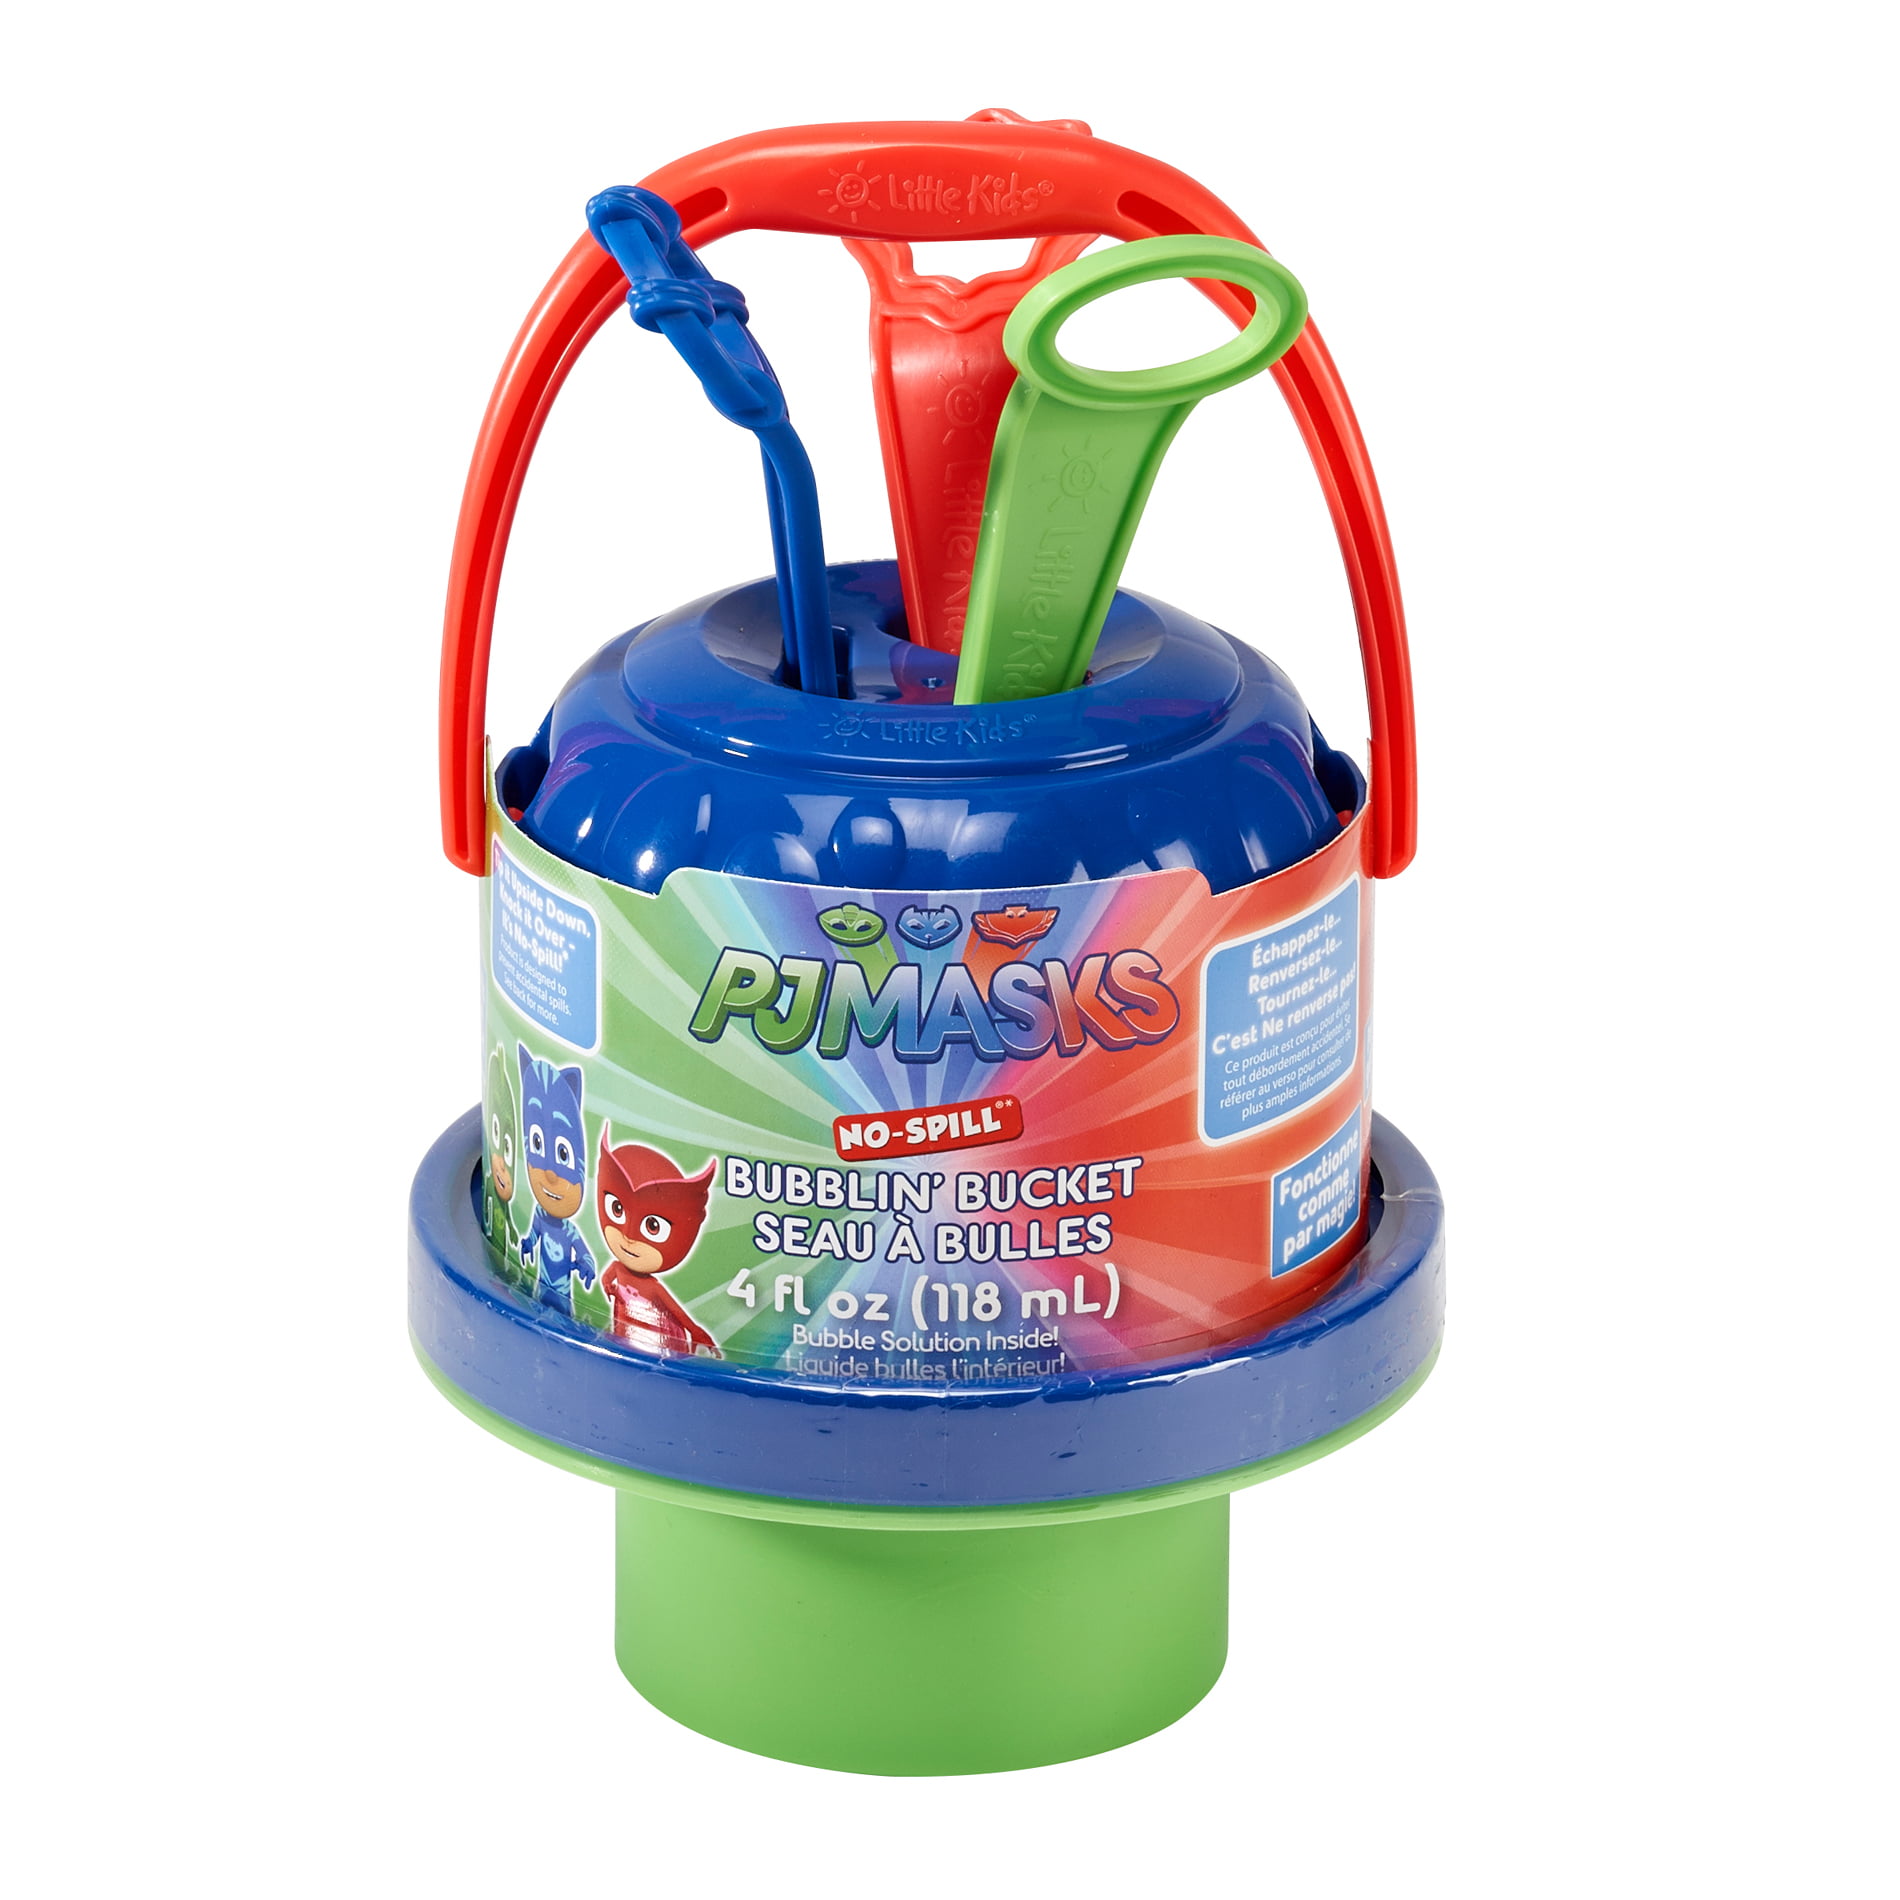 PJ Masks Character Bubble Non Spill Bucket Play Set an Wands Toy Gift 